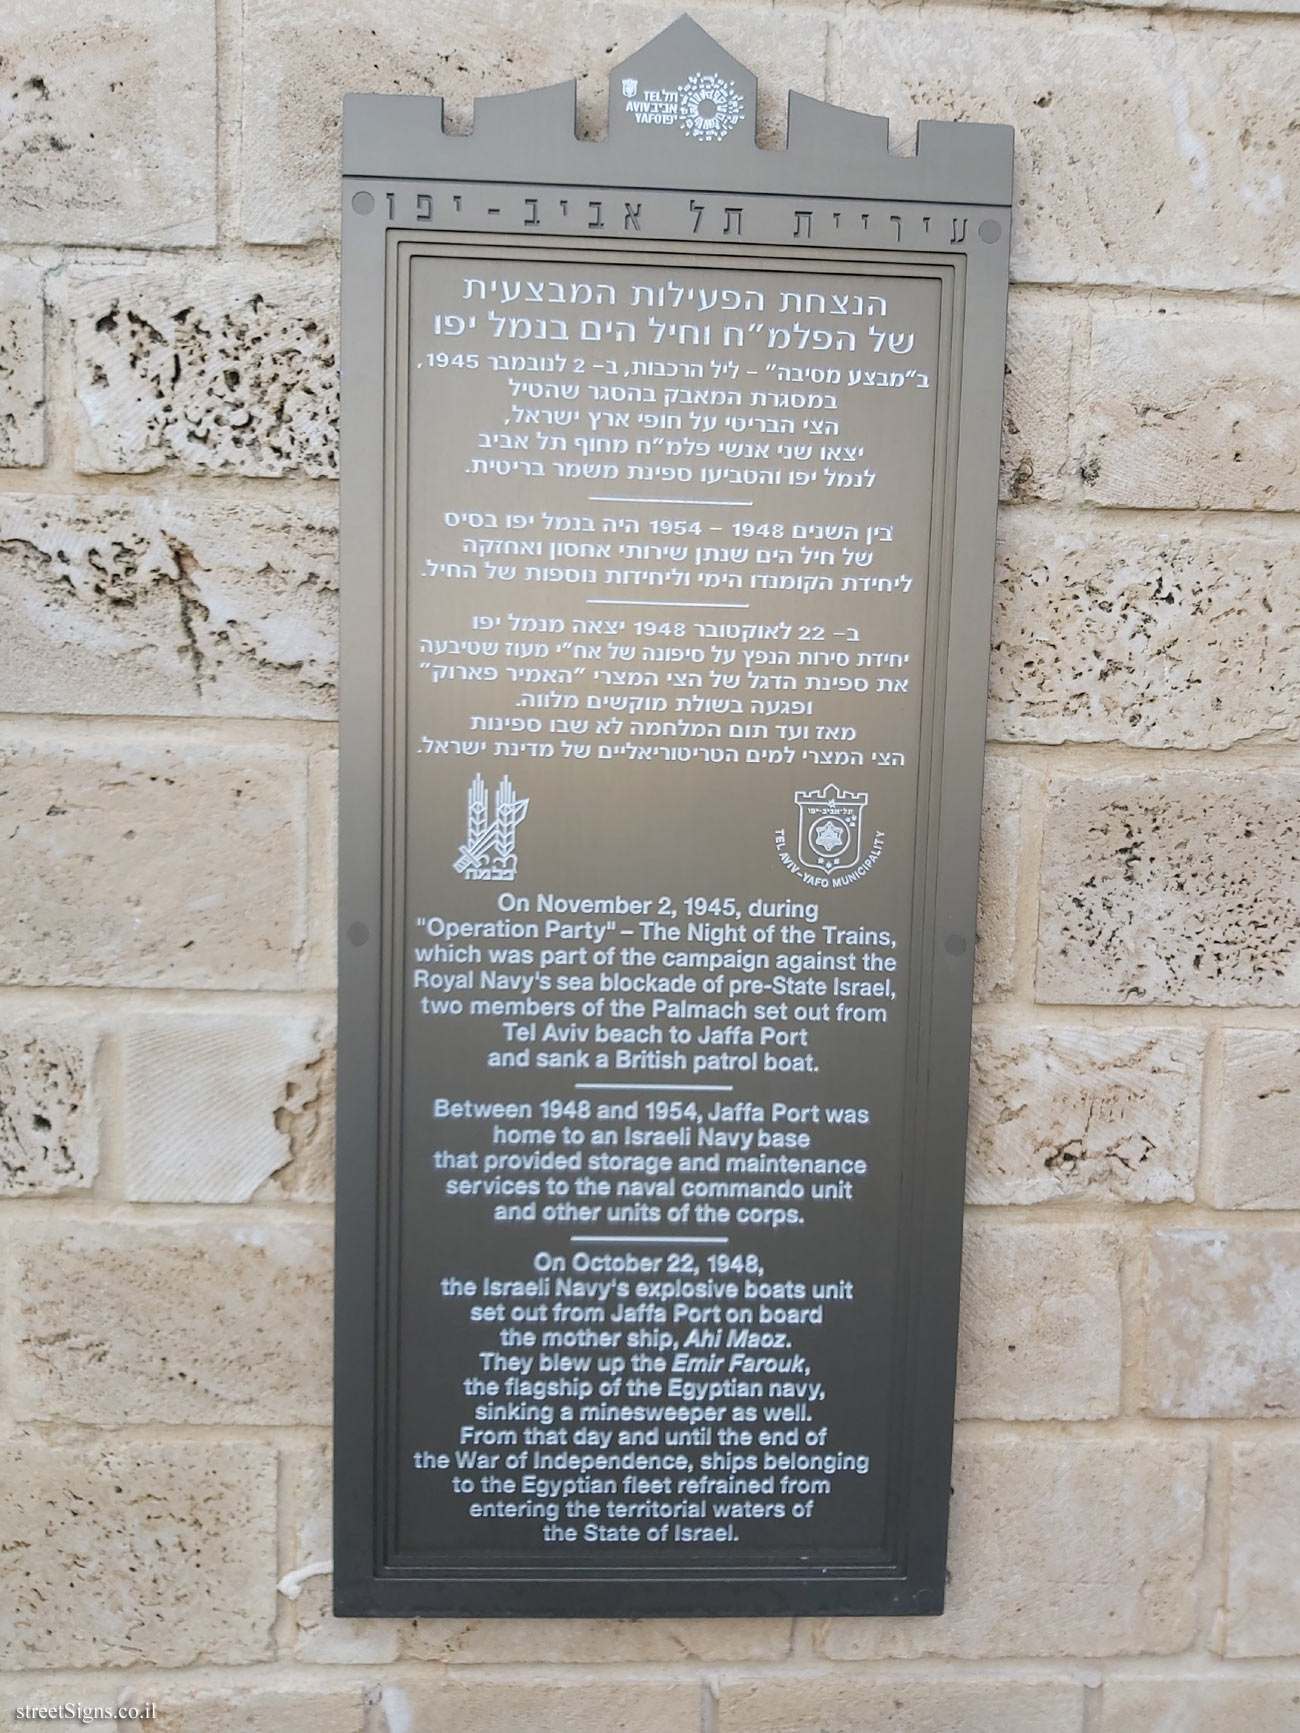 The Plamach and Navy operation in Jaffa - Commemoration of Underground Movements in Tel Aviv